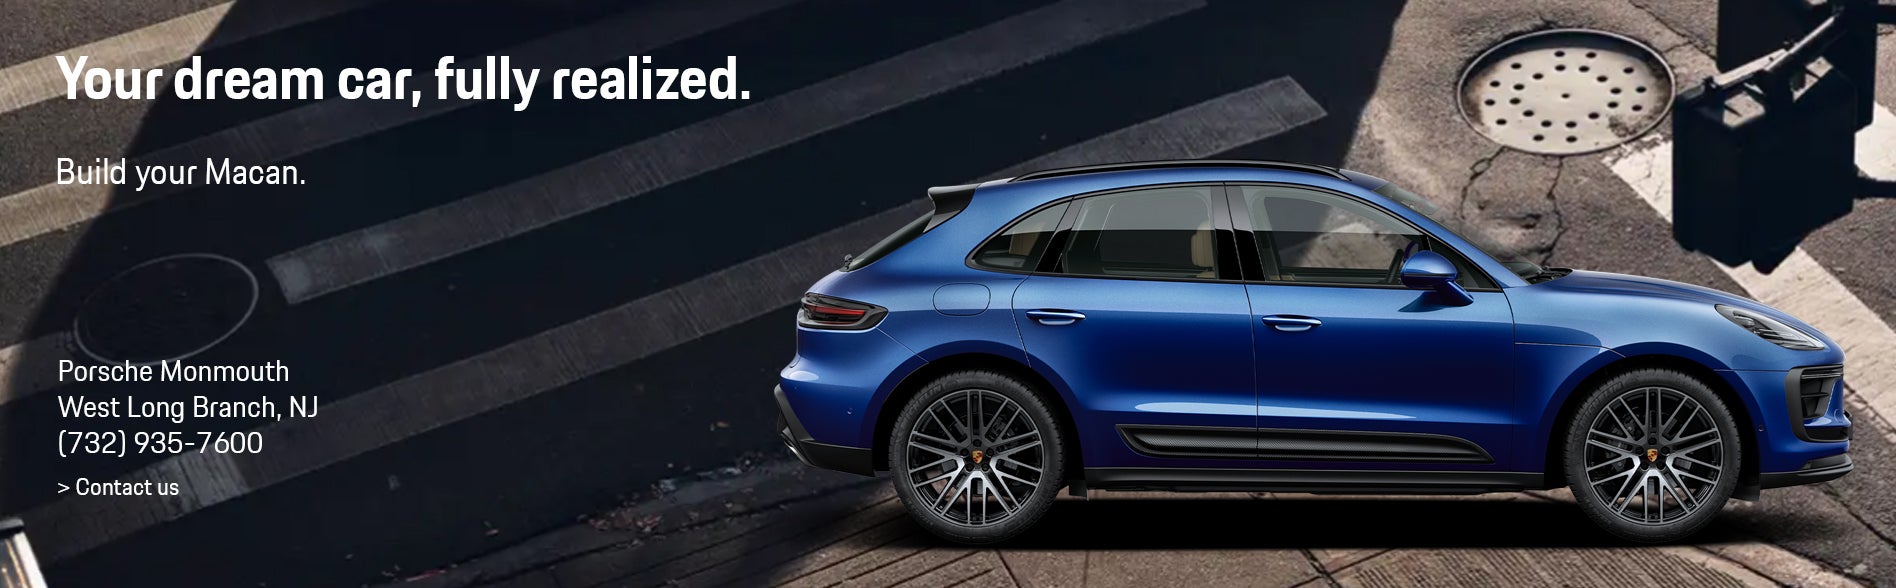 Your dream car, fully realized - Build your Macan at Porsche Monmouth